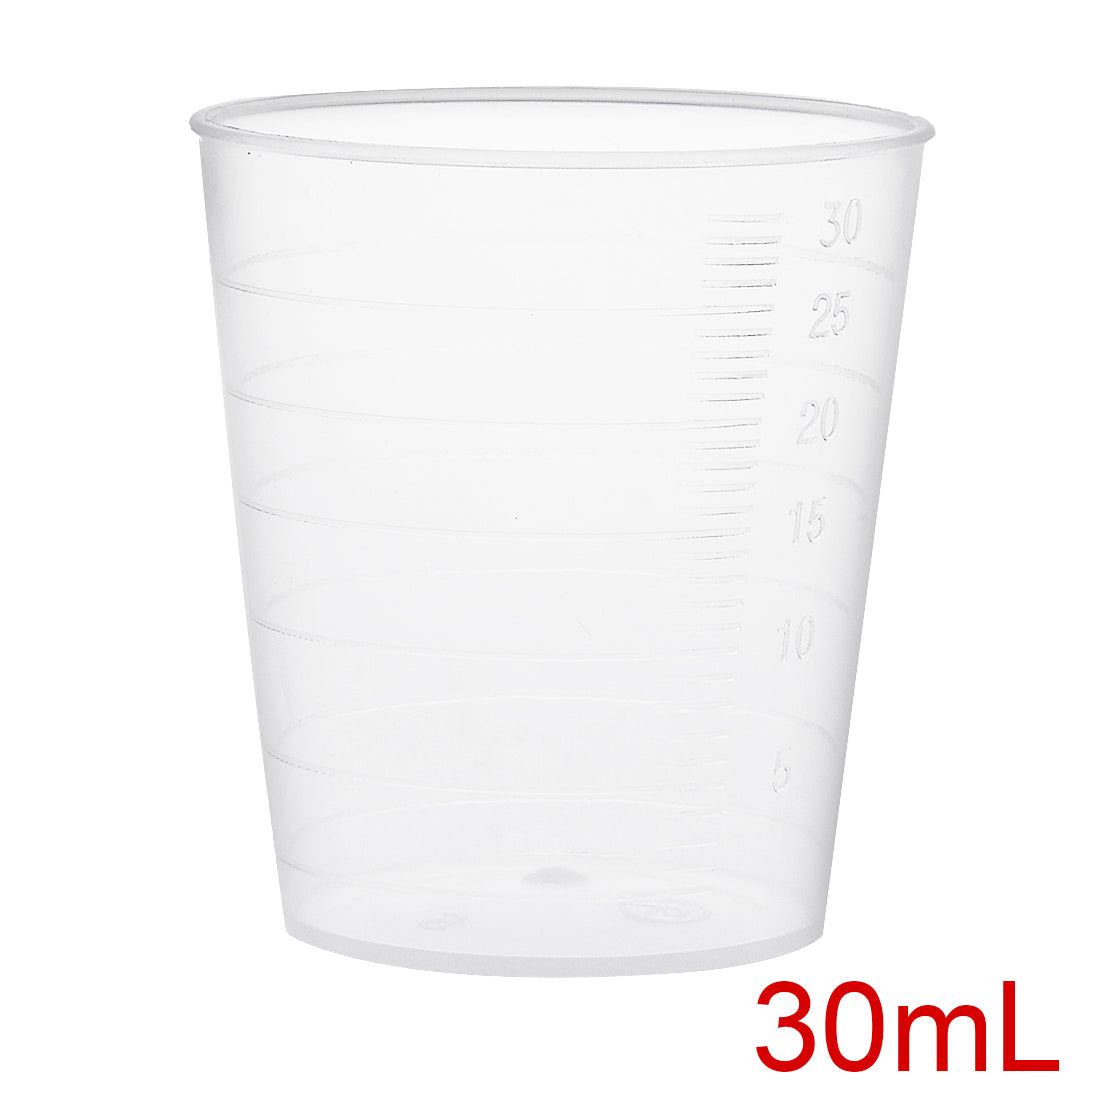 uxcell Uxcell Kitchen Laboratory 30mL Plastic Measuring Cup w Cap